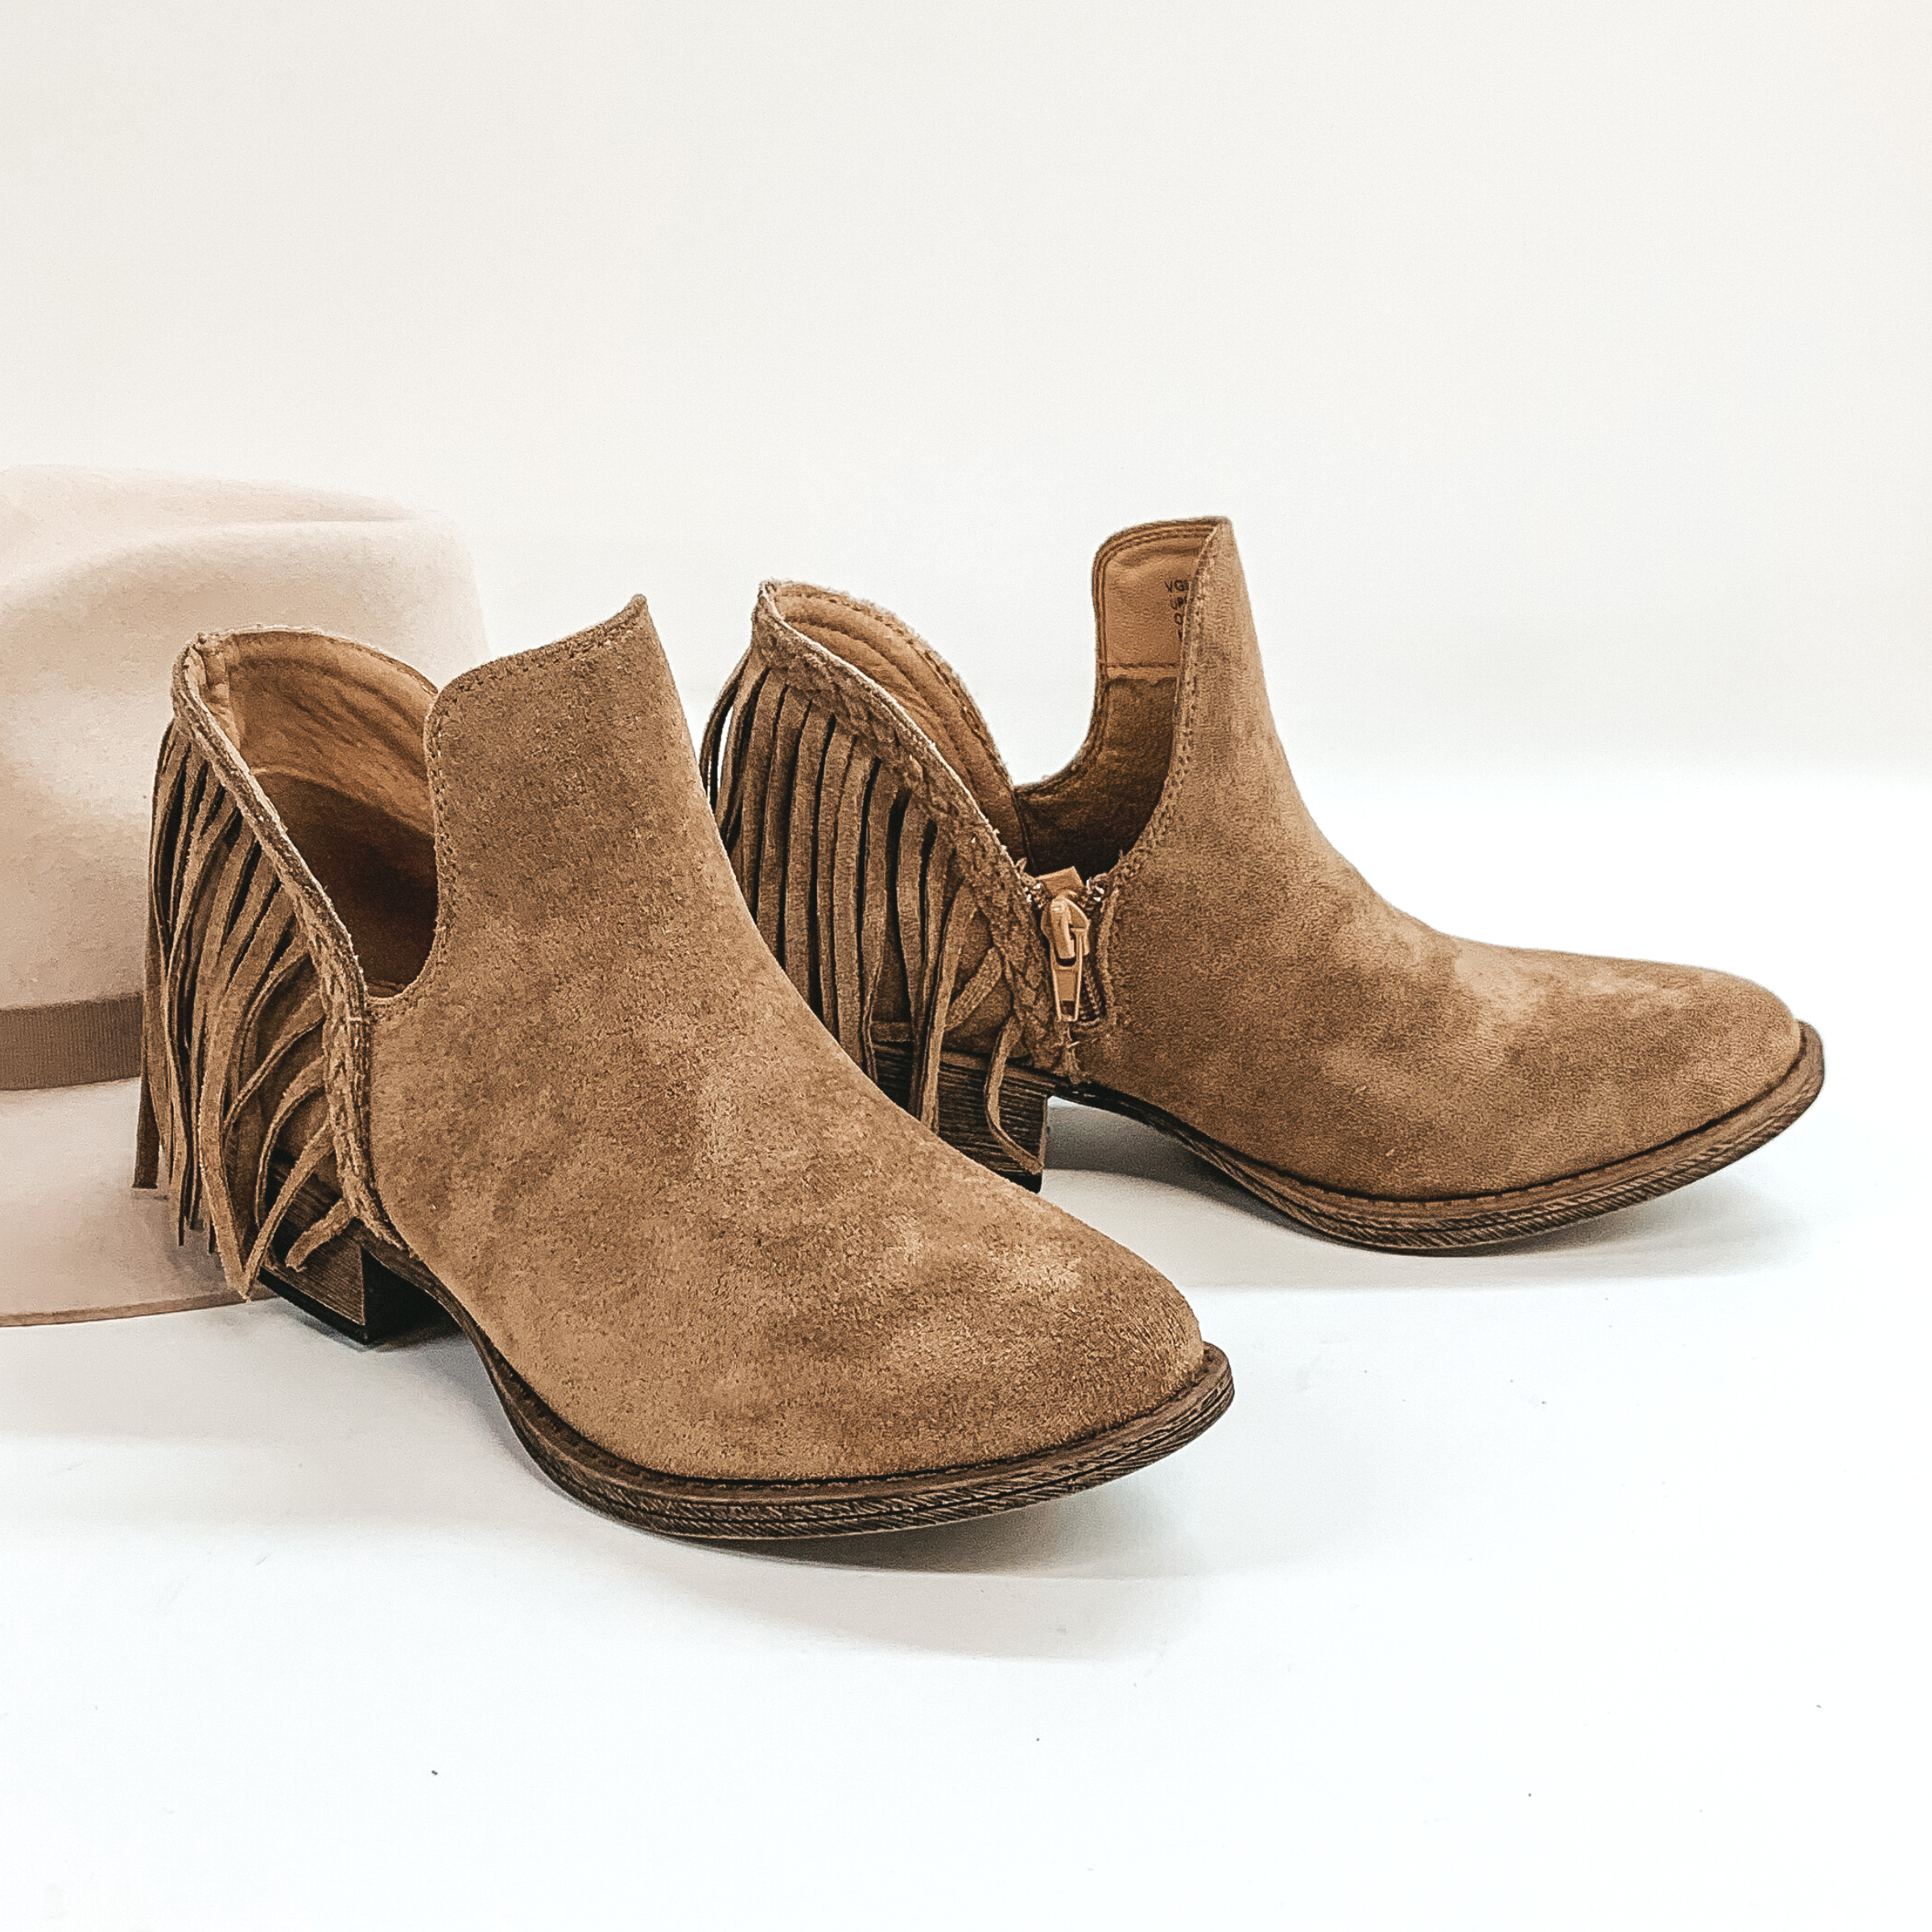 Very G | Be Yourself Heeled Fringe Booties with Cutouts in Taupe - Giddy Up Glamour Boutique